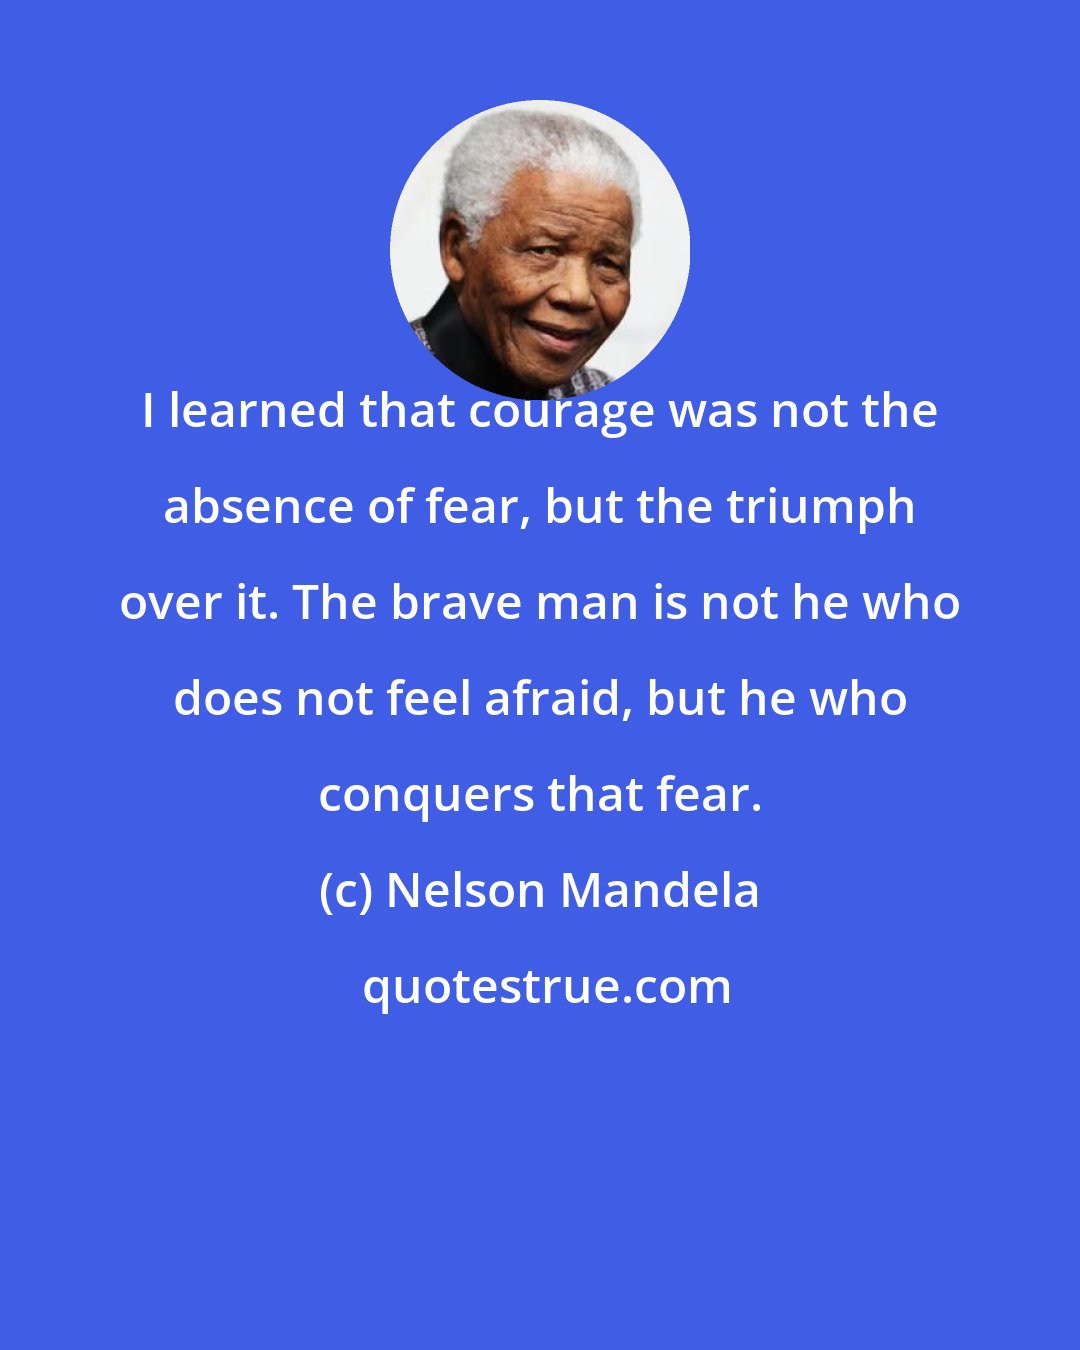 Nelson Mandela: I learned that courage was not the absence of fear, but the triumph over it. The brave man is not he who does not feel afraid, but he who conquers that fear.